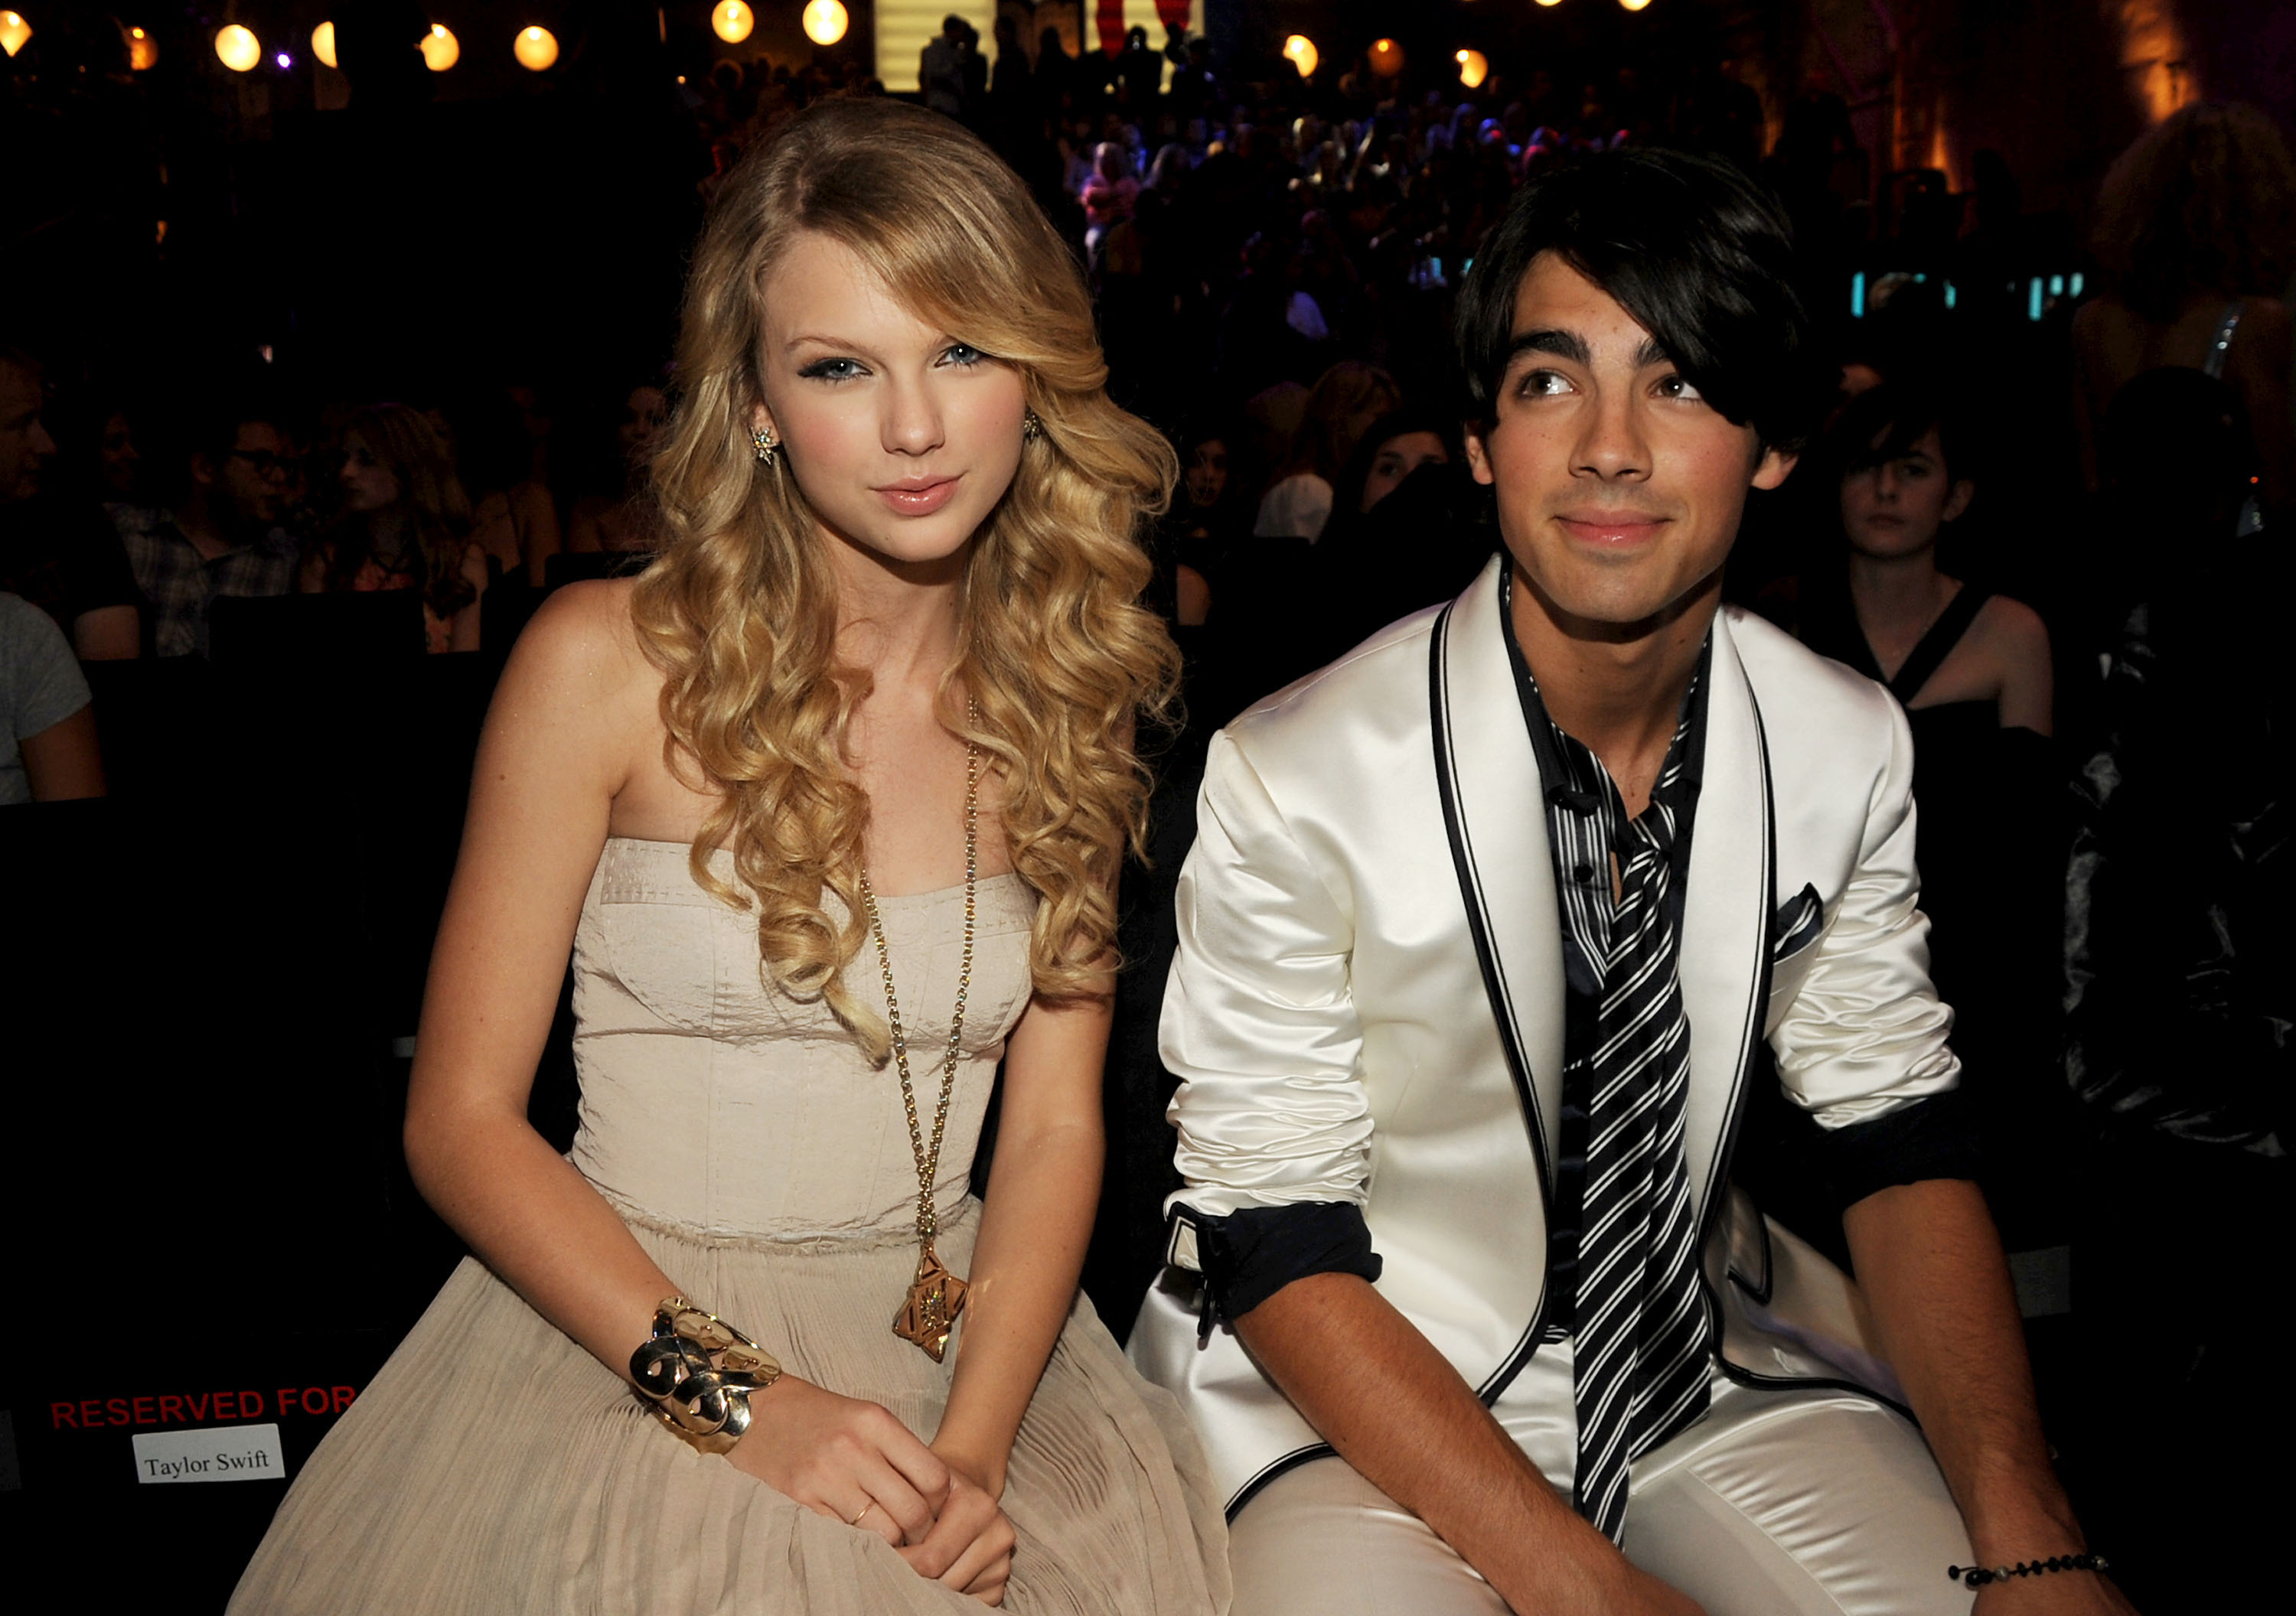 Taylor and Joe sitting next to each other at an awards show